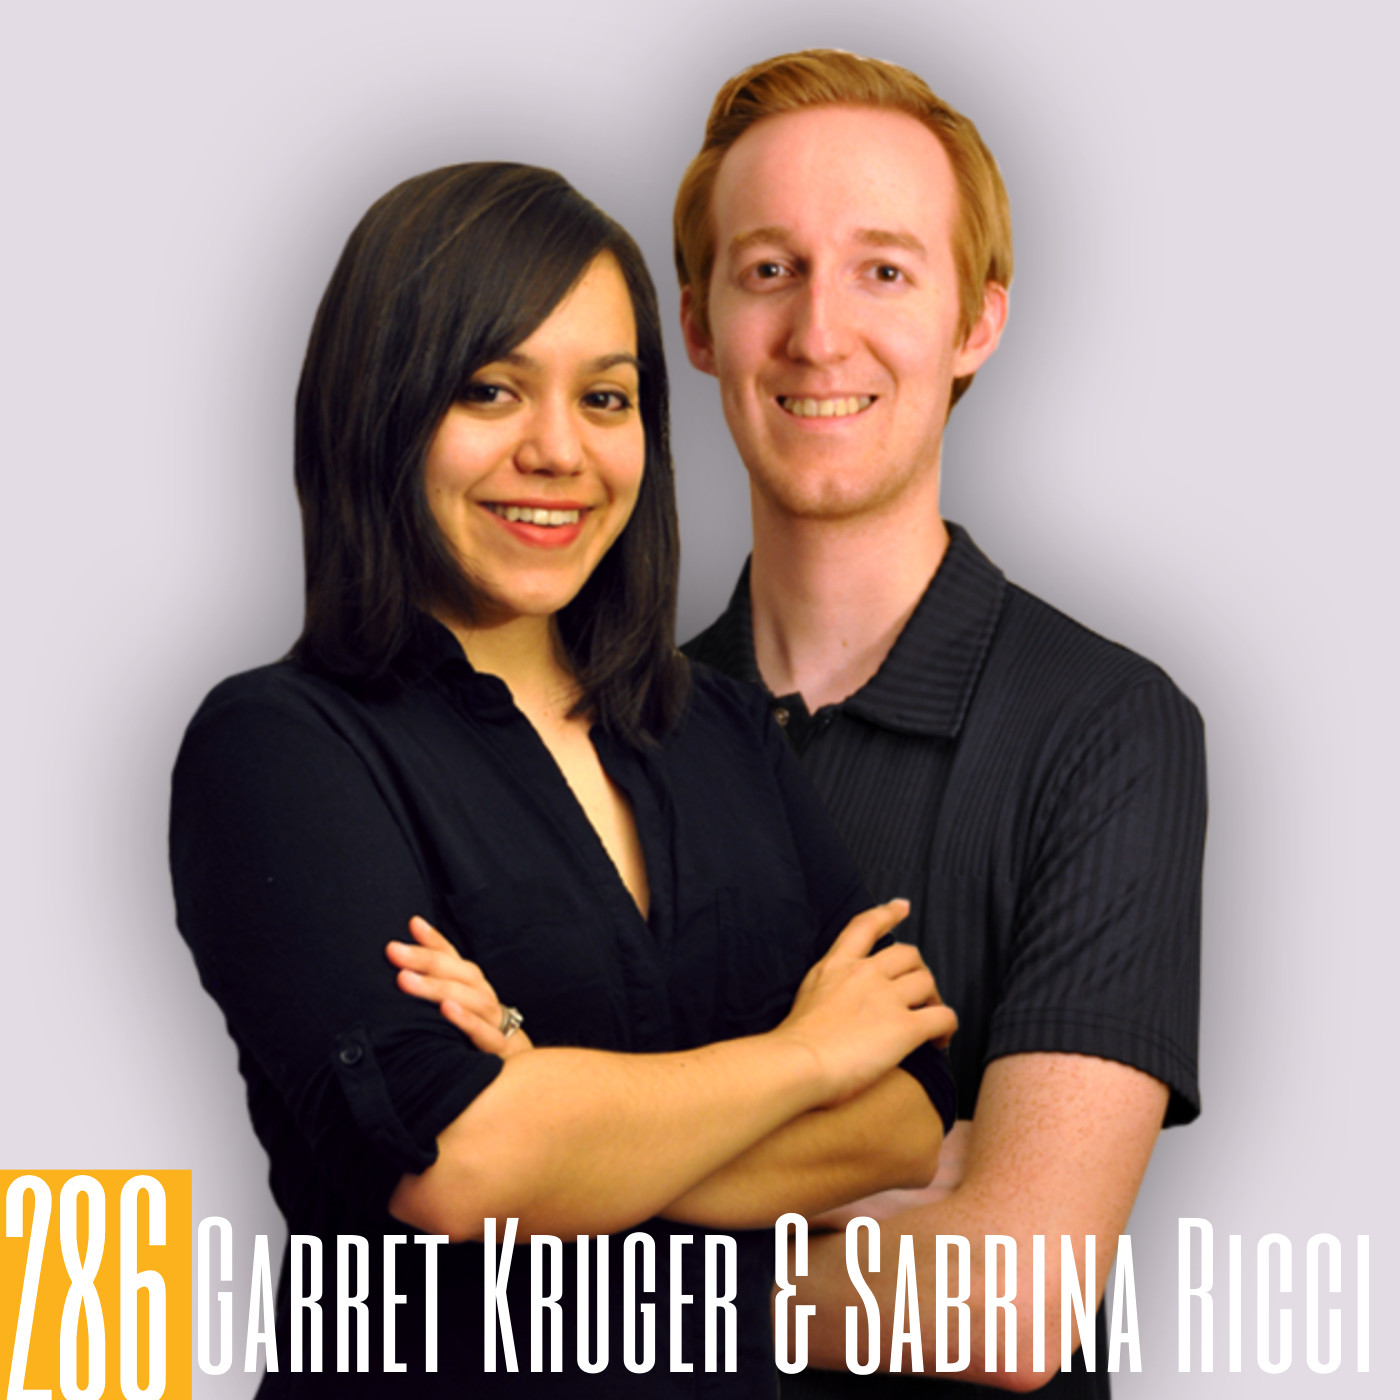 286 Garret & Sabrina - A Passion for Dinosaurs & Building a Niche Podcast Community